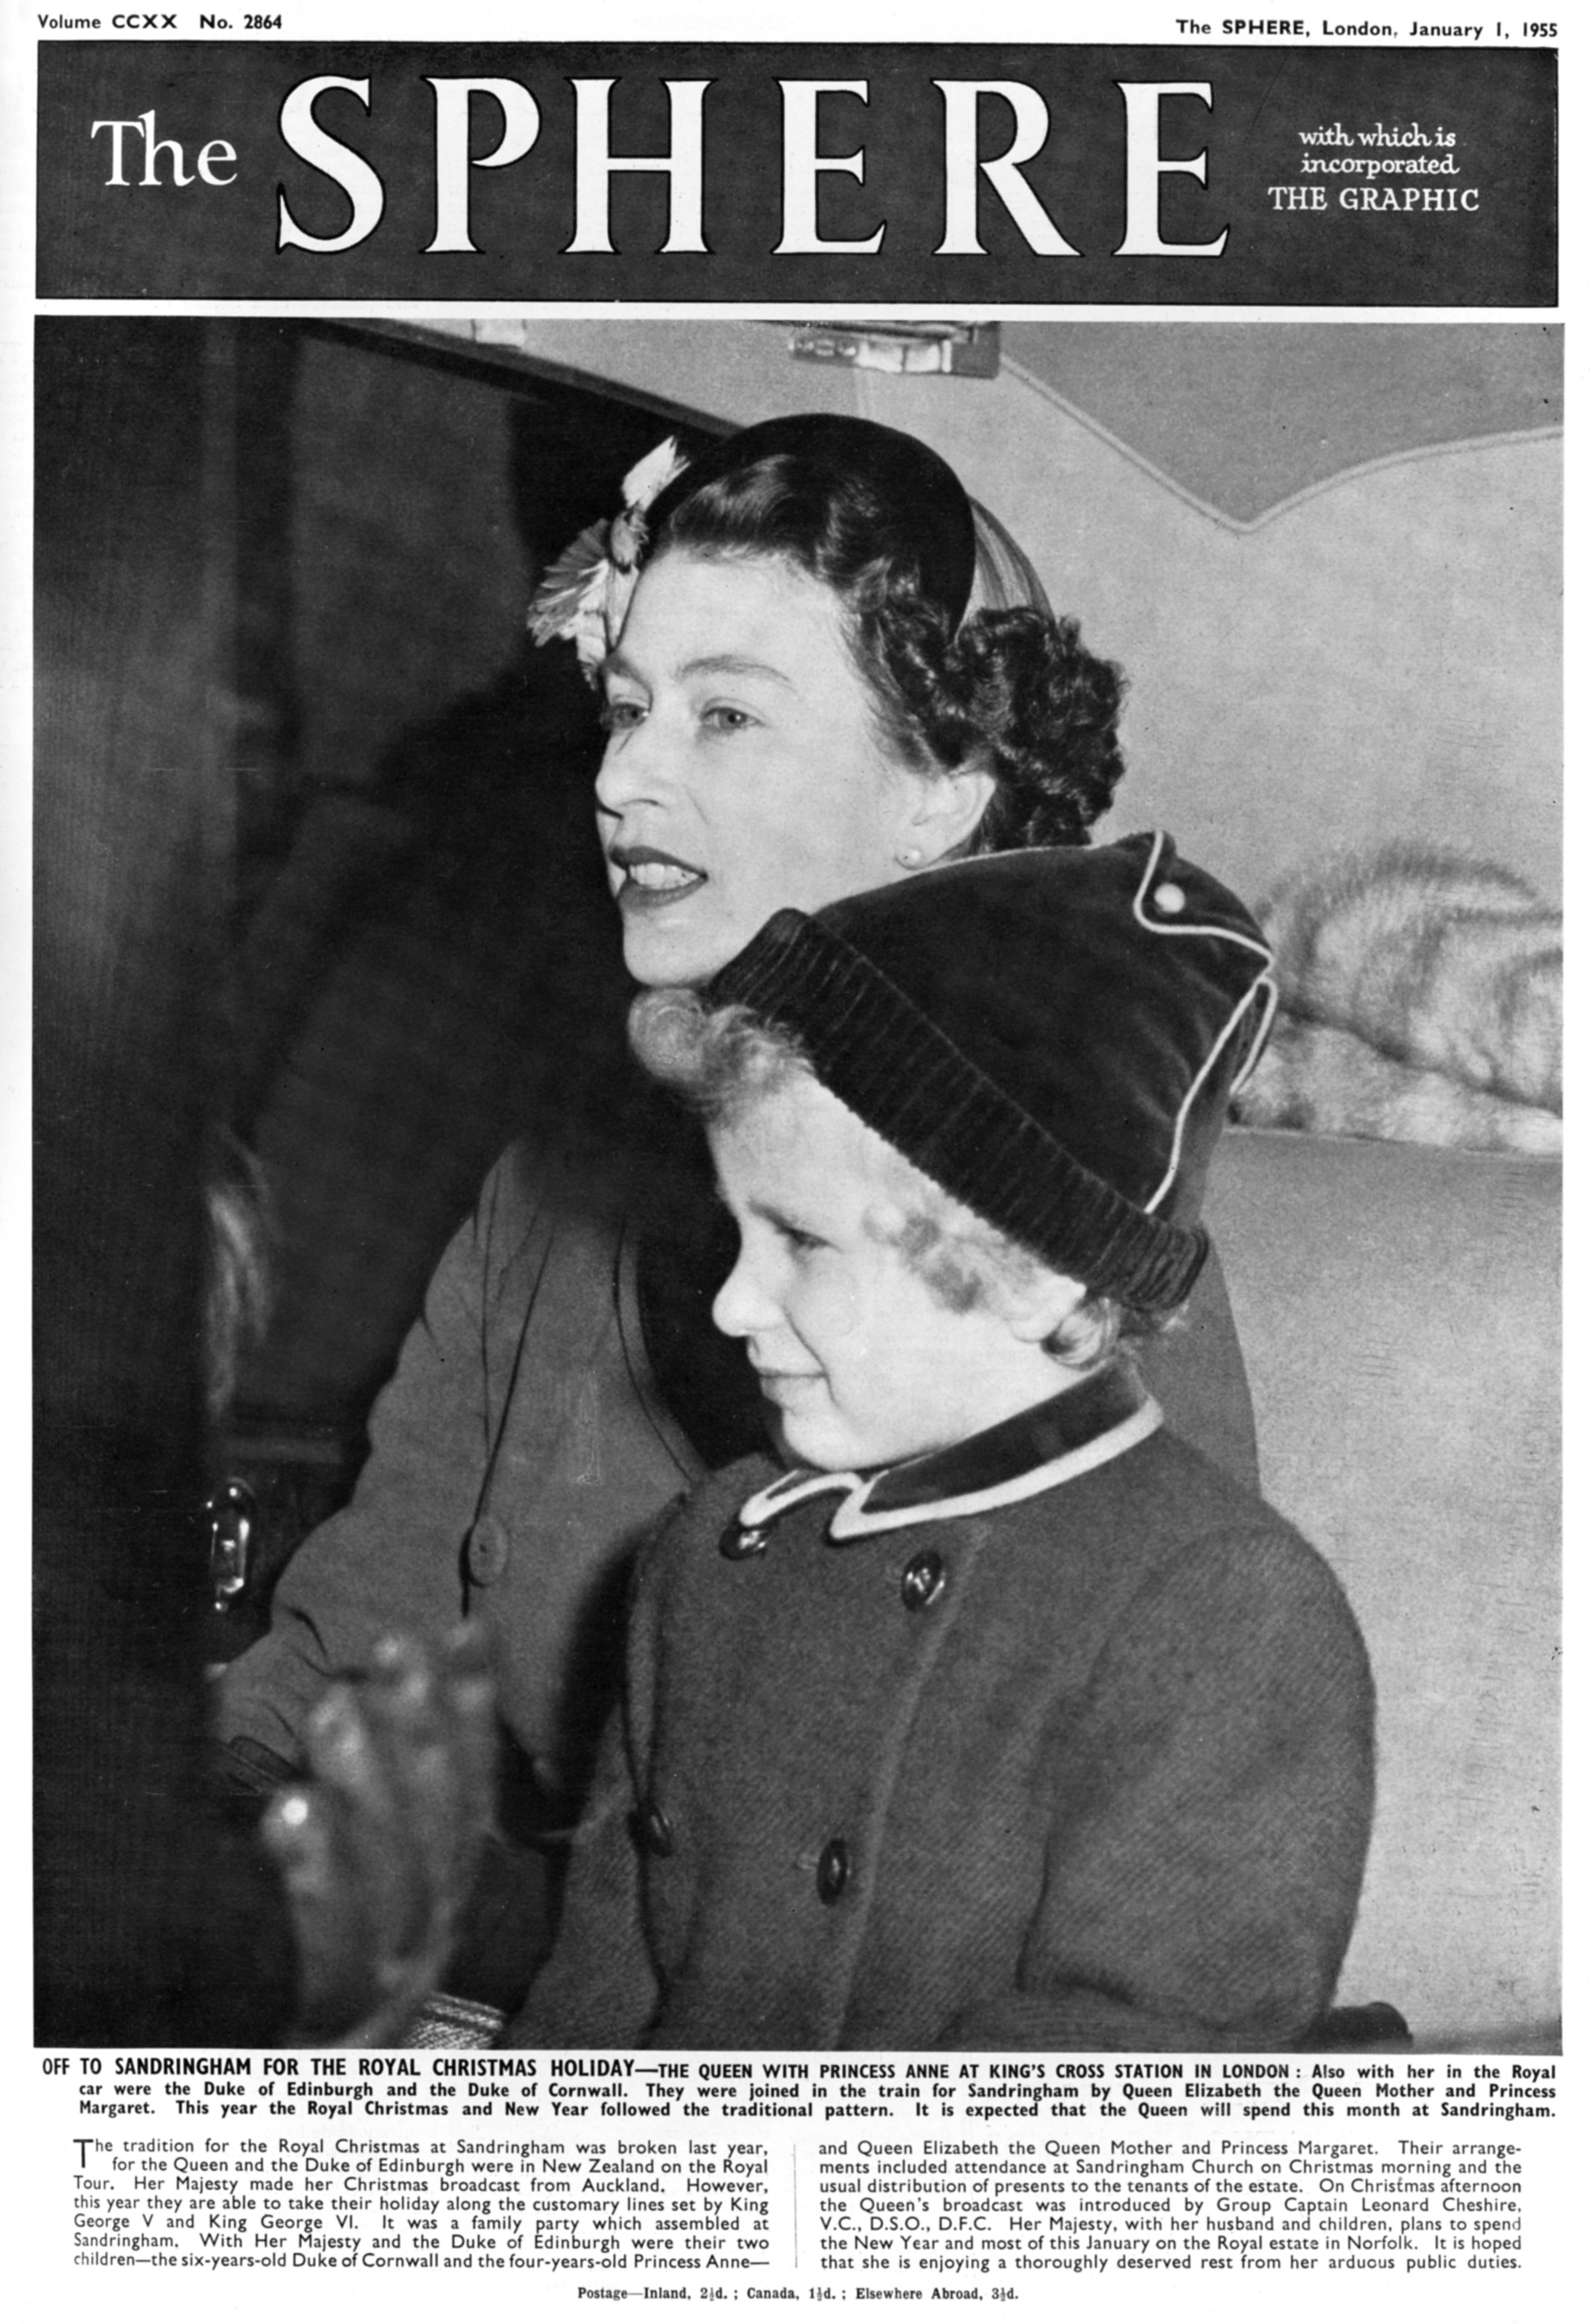 First Anniversary The Queen’s Death - The Queen with Princess Anne at Kings Cross Station leaving for Sandringham in 1955